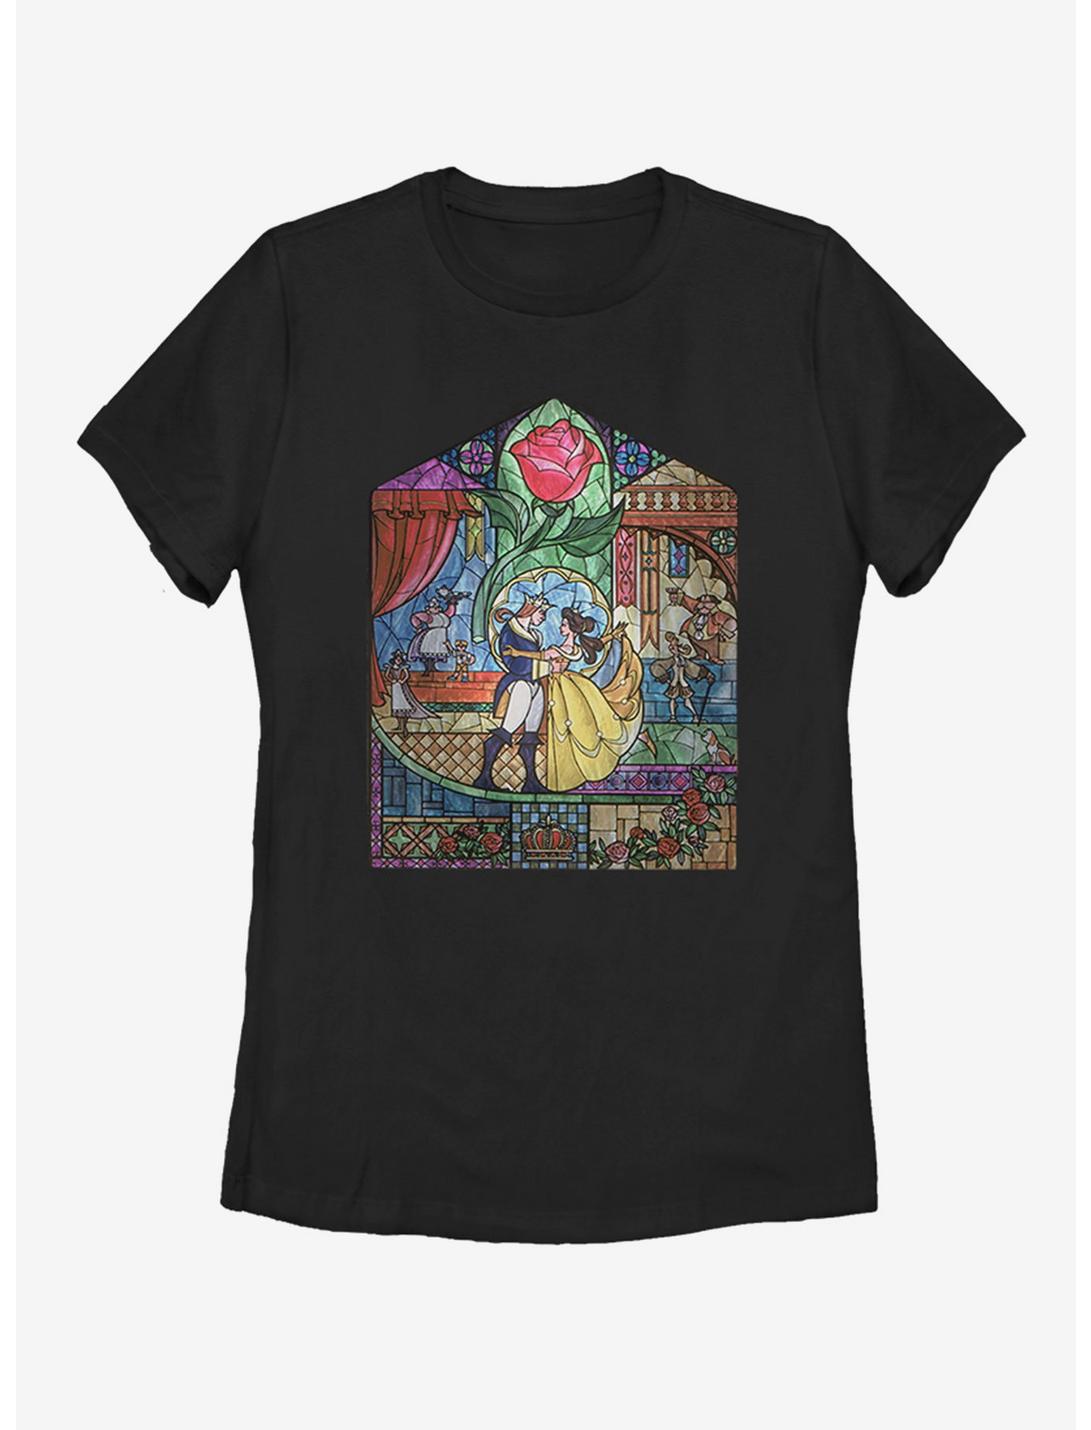 Plus Size Disney Beauty and The Beast Glass Beauty Womens T-Shirt, BLACK, hi-res